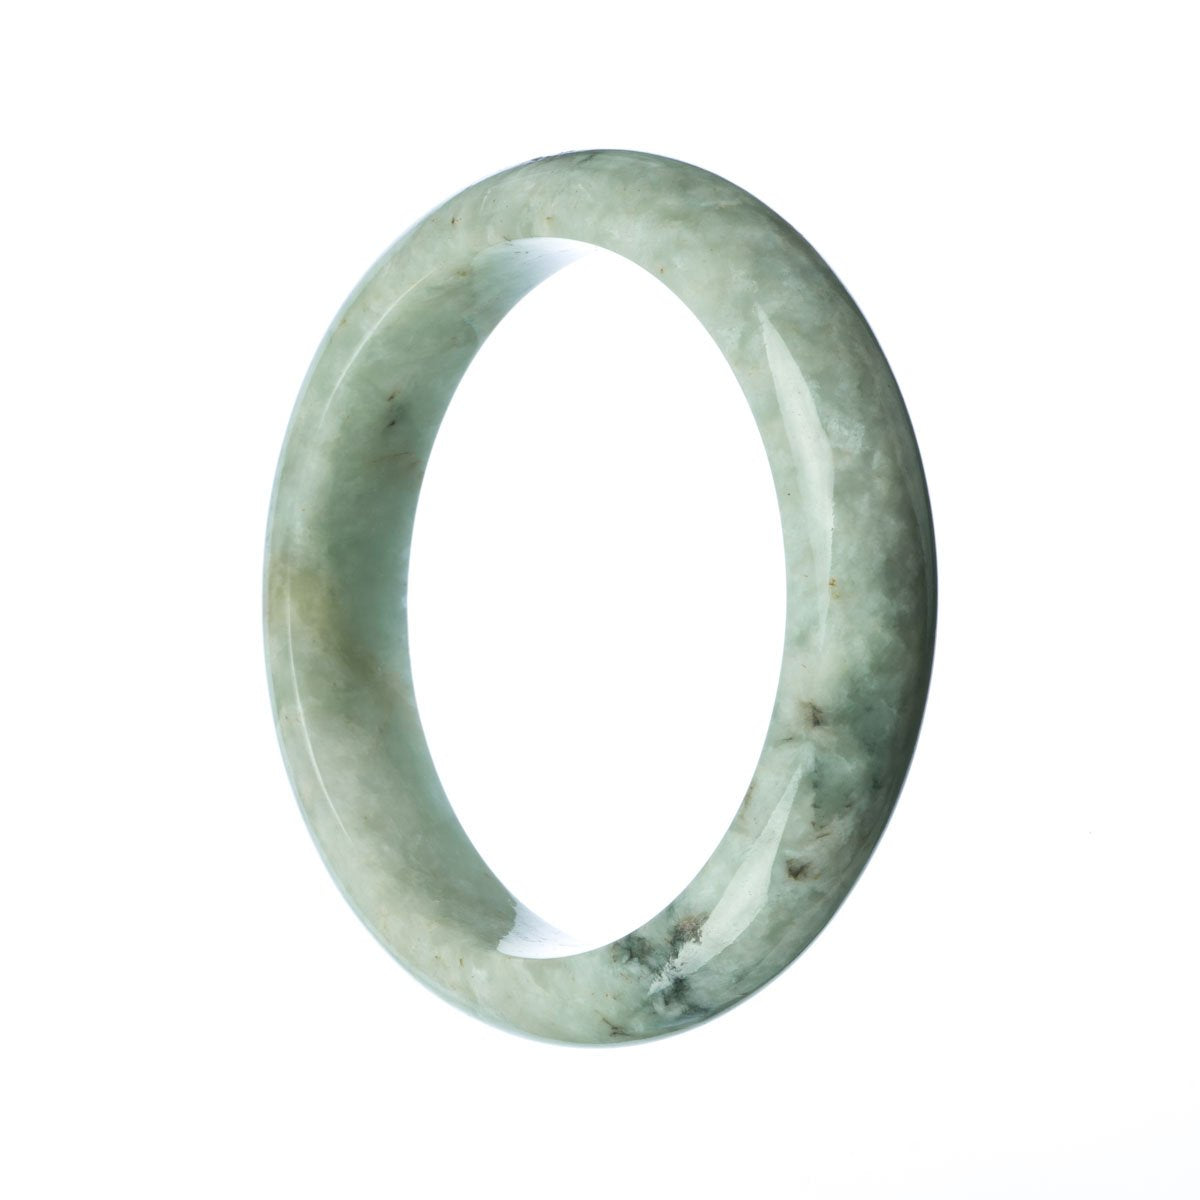 A pale green jadeite bracelet with a half moon design, crafted from authentic Grade A jadeite.